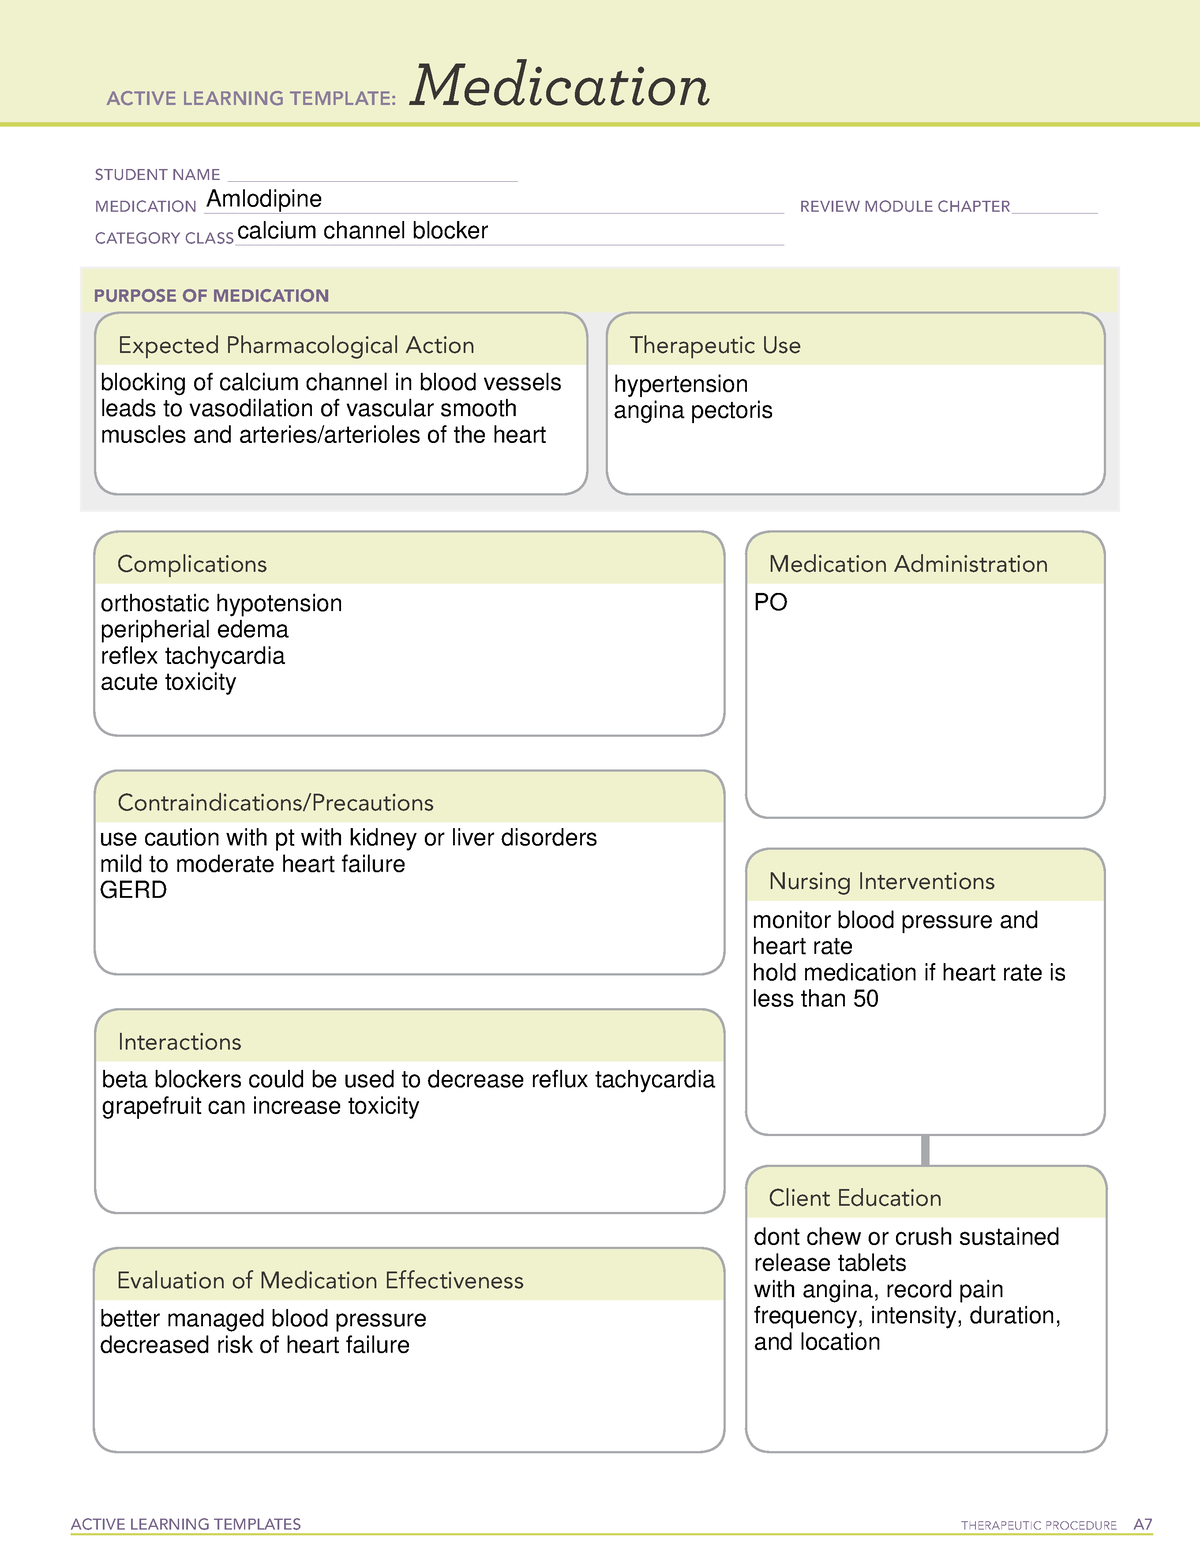 Amlodipine ati ACTIVE LEARNING TEMPLATES TherapeuTic procedure A